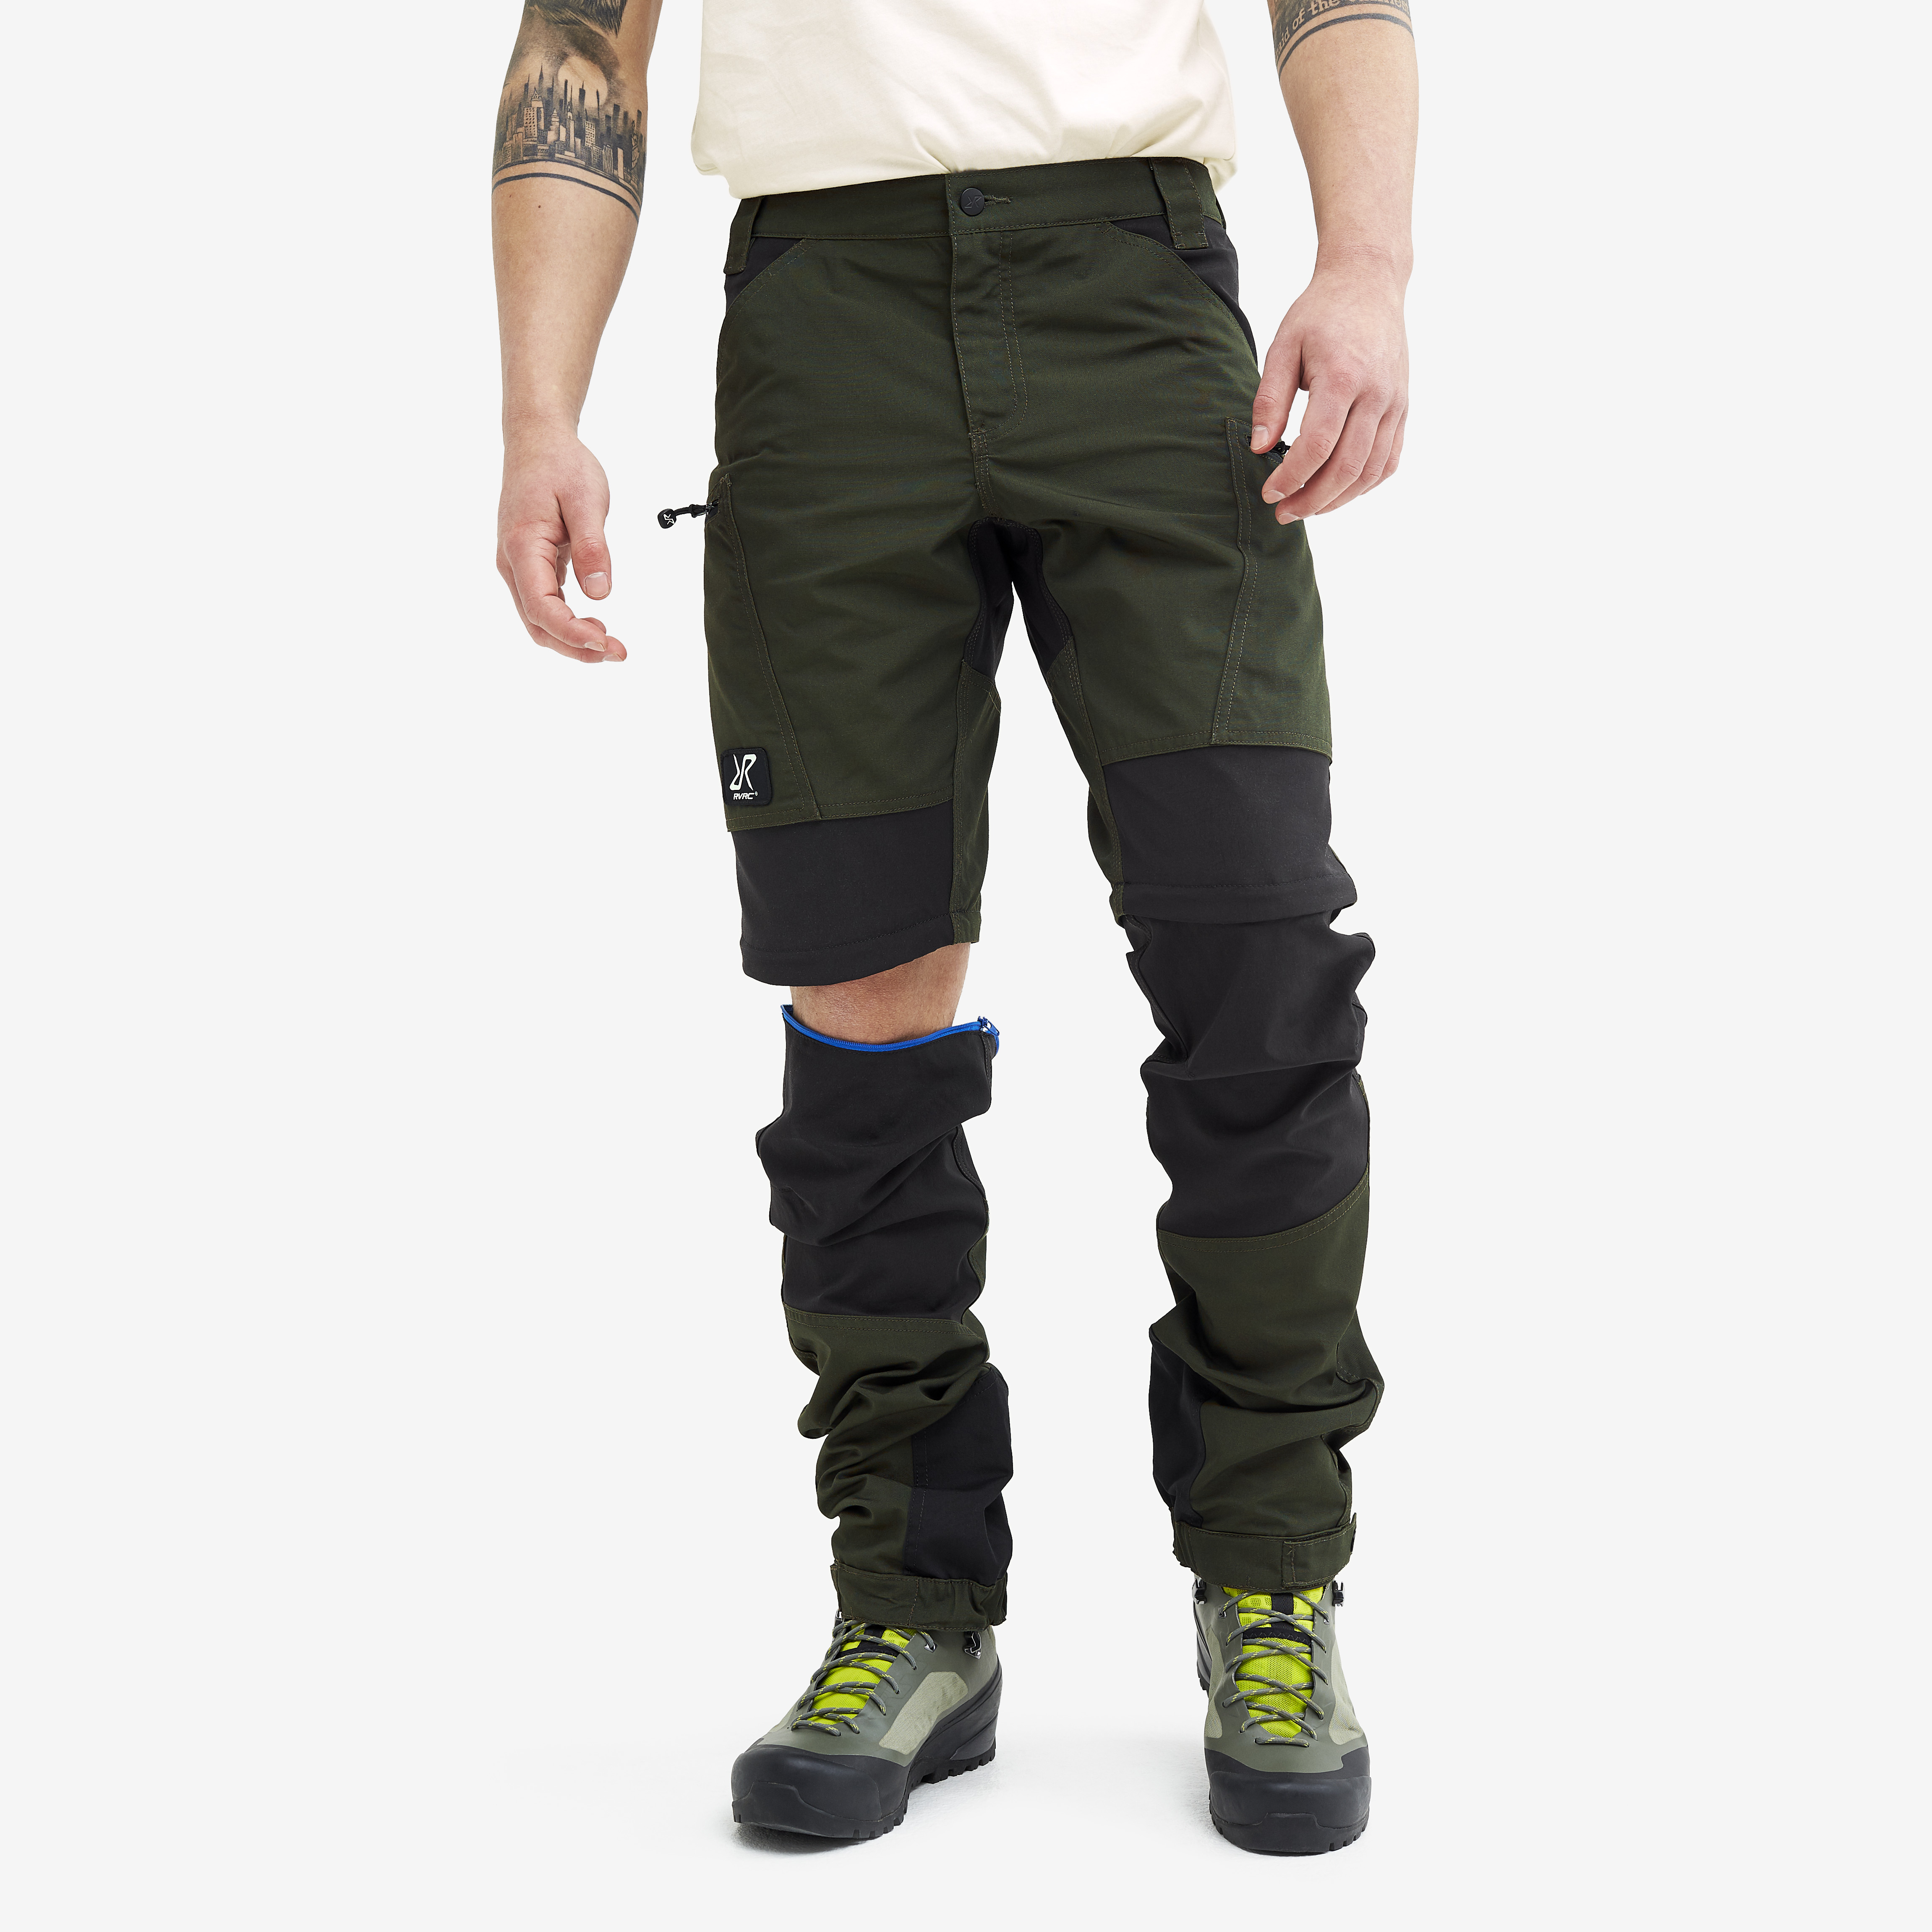 Nordwand Pro Zip-off hiking pants for men in green